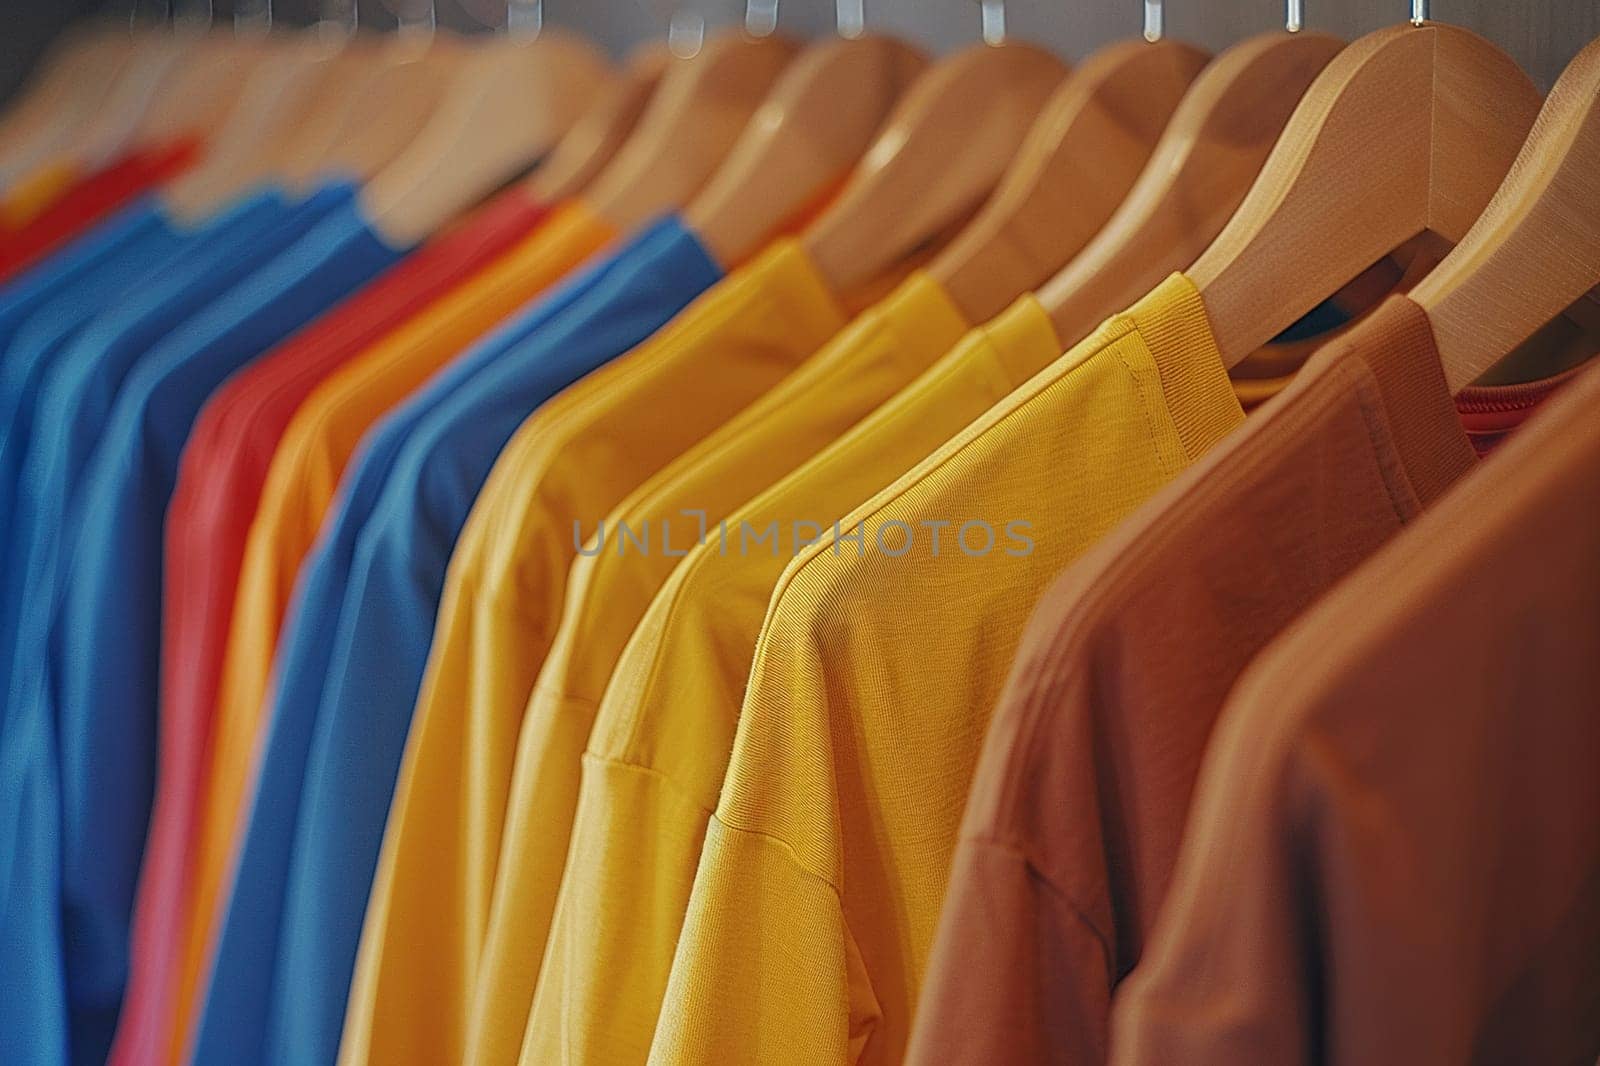 Plain T-shirts without patterns or inscriptions hang in a row on hangers. T-shirt mockups for men and women.